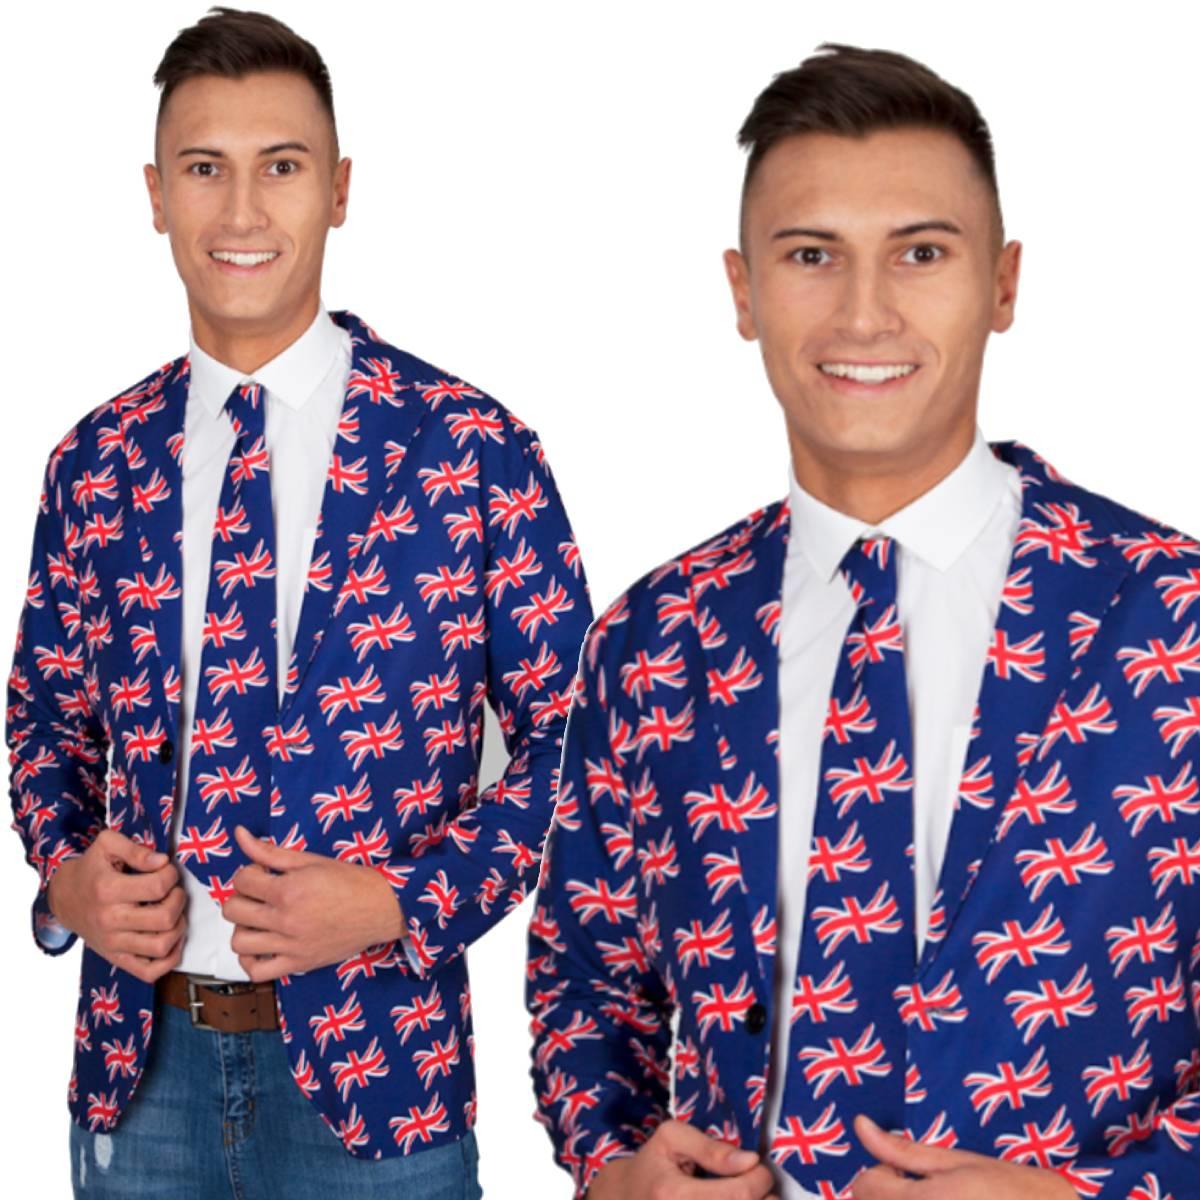 Great Britain Union Jack Jacket and Tie by Wicked EM-3257 available here at Karnival Costumes online party shop